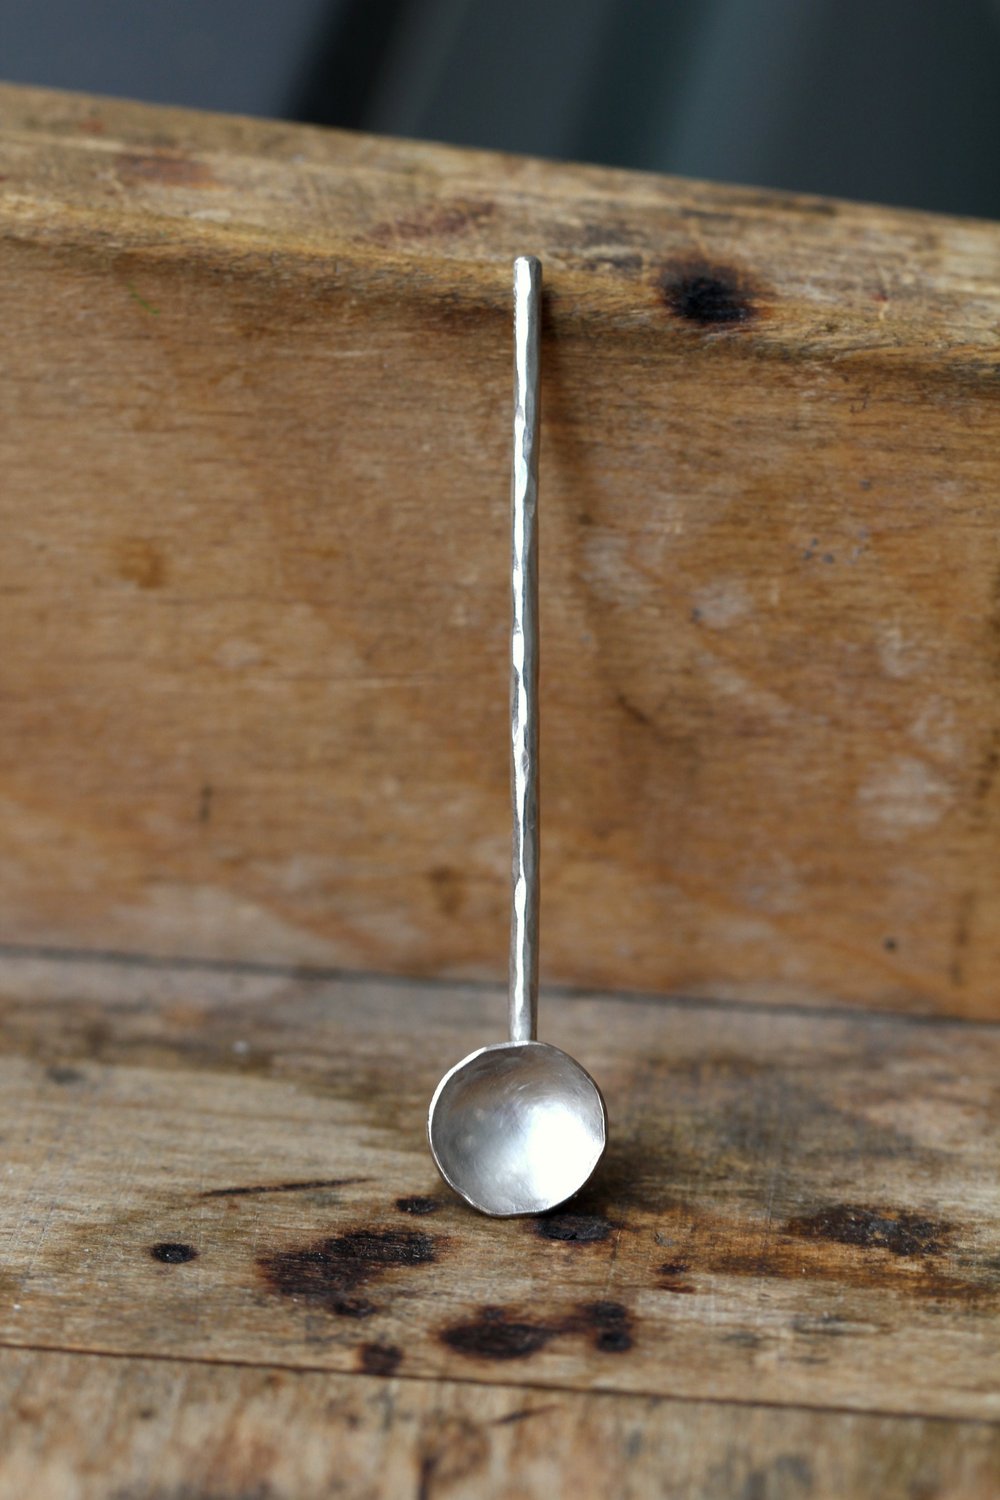 Image of RR Designs Sterling Silver Spoon #9 with round textured handle - Size Small